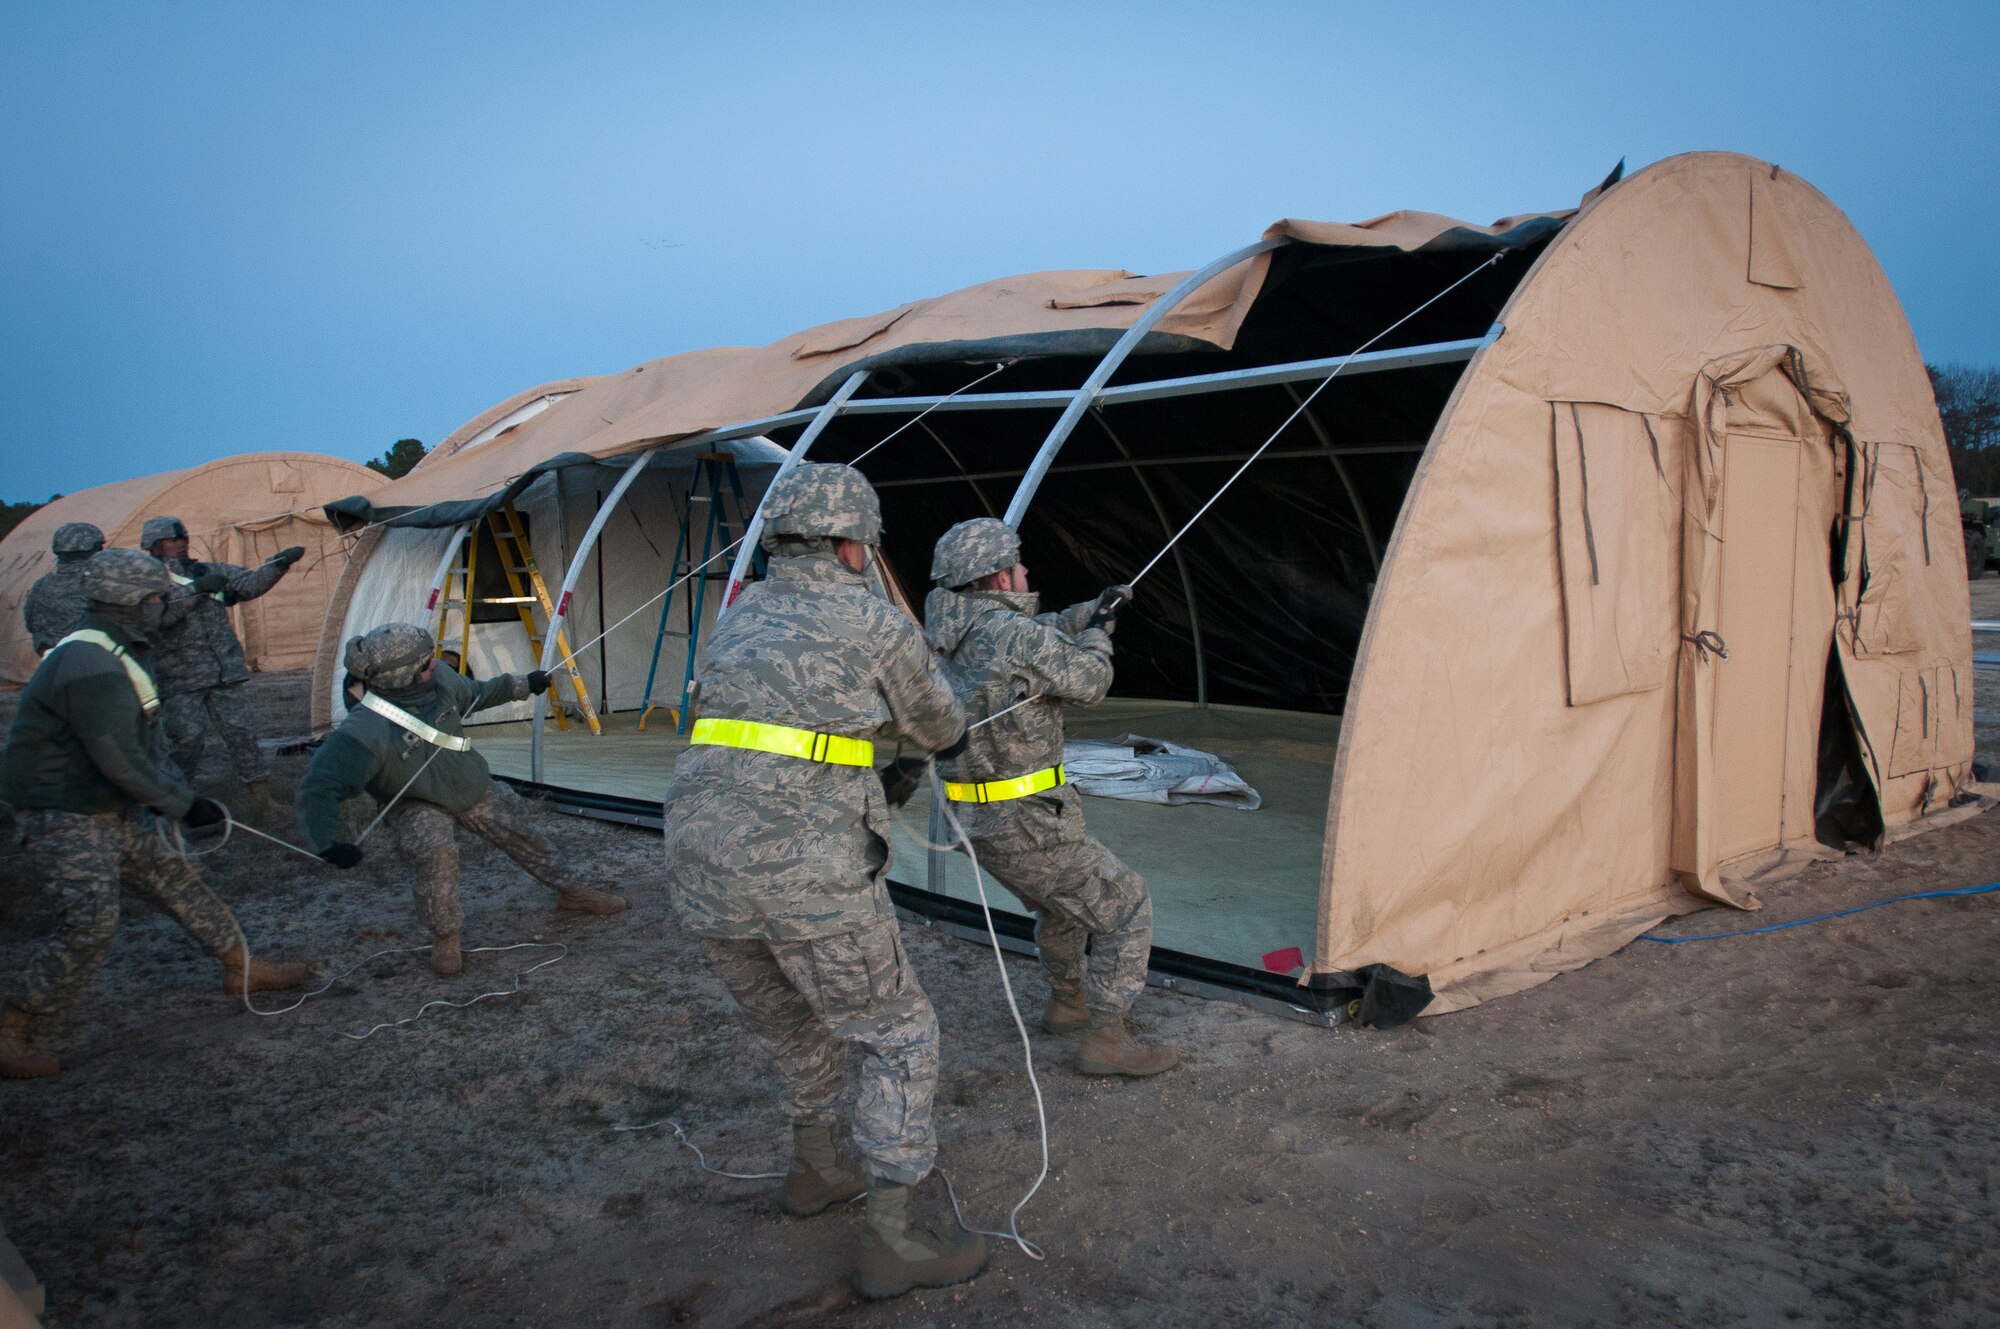 Airmen from the Kentucky Air National Guard's 123rd Contingency Response Group set up an Alaskan Shelter tent at Joint Base McGuire-Dix-Lakehurst, N.J., March 26, 2012, during Exercise Eagle Flag. More than 80 Airmen from the Kentucky Air Guard have joined forces with over 50 active-duty Army troops and Air Guardsmen from New Jersey and Mississippi to establish an aerial port at Lakehurst Naval Air Engineering Station within 24 hours of arrival. Inspectors from U.S. Transportation Command will evaluate the performance of the Kentucky unit during the exercise. (U.S. Air Force photo by Maj. Dale Greer)